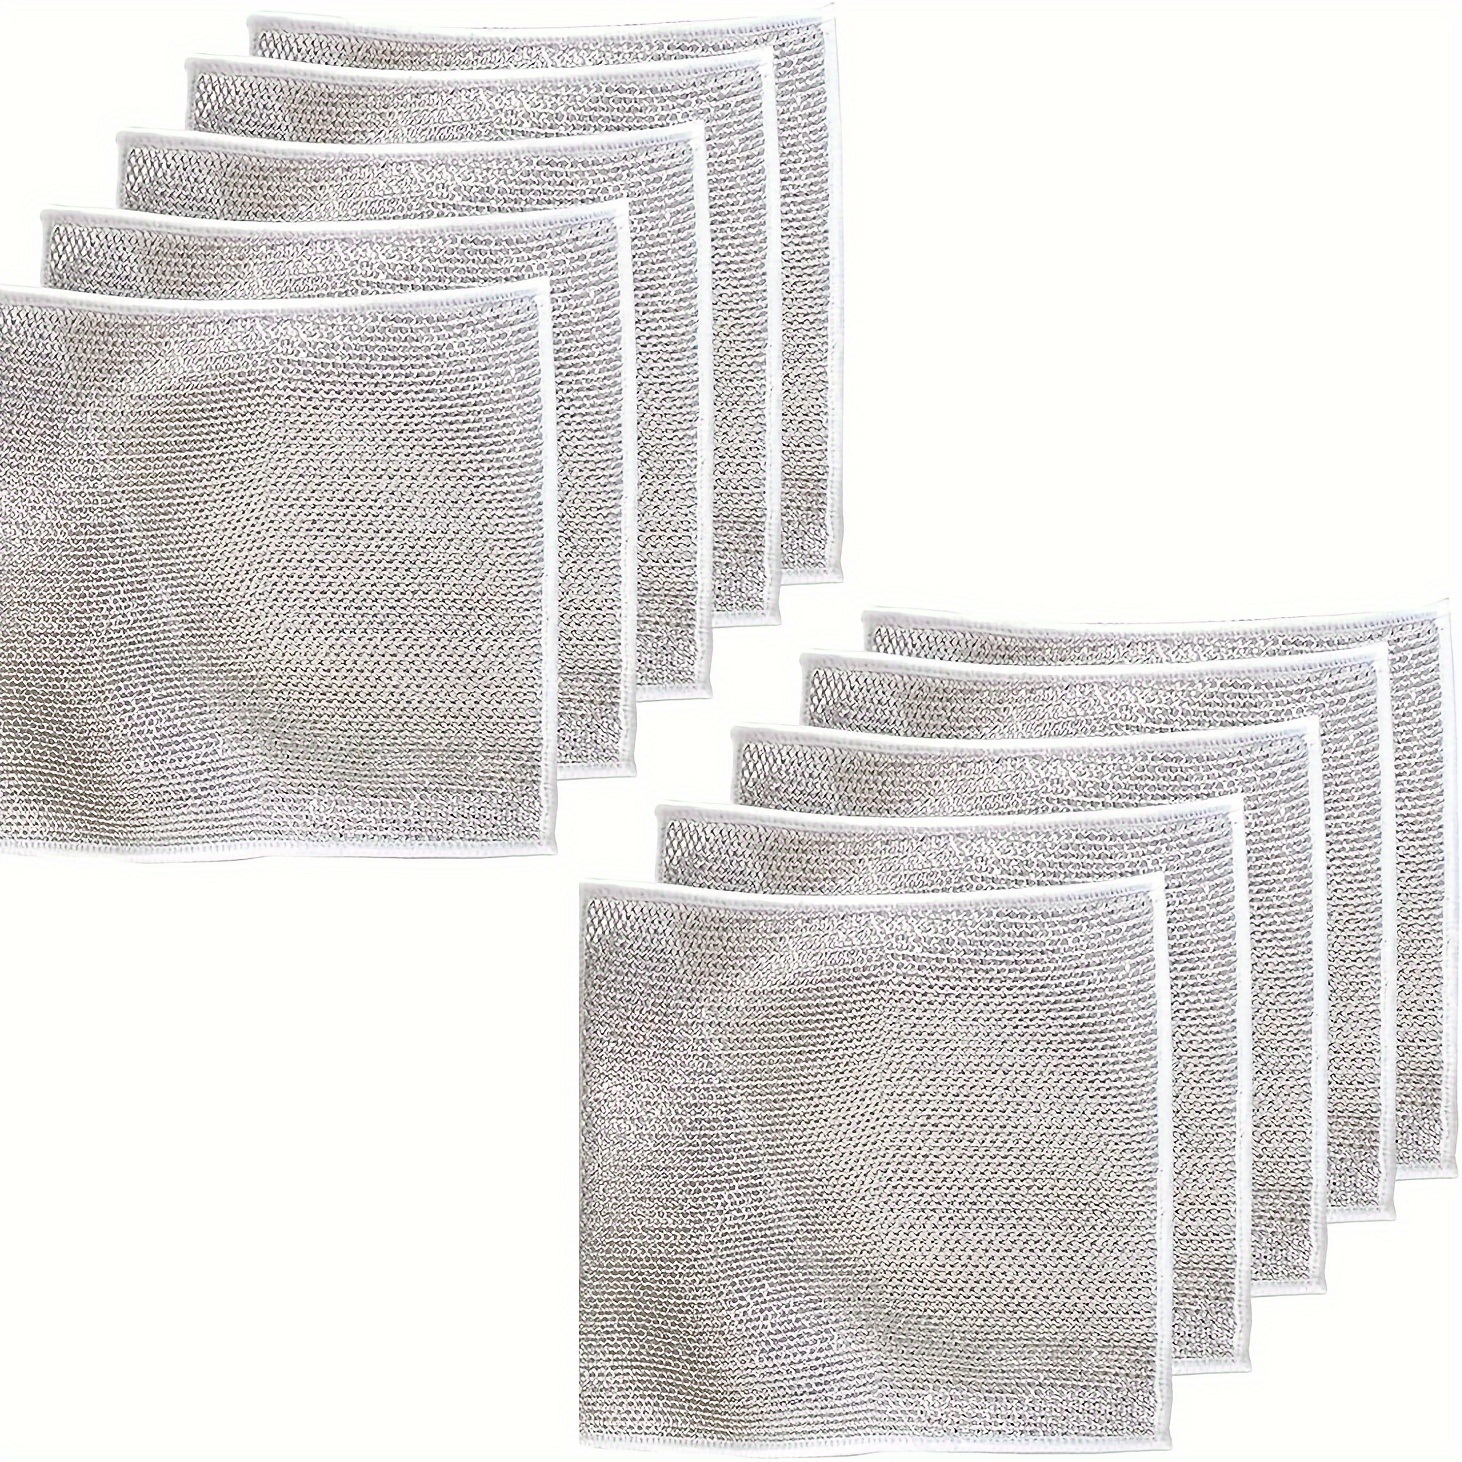 Multipurpose Wire Dishwashing Rags for Wet and Dry, Wire Dishwashing Rag